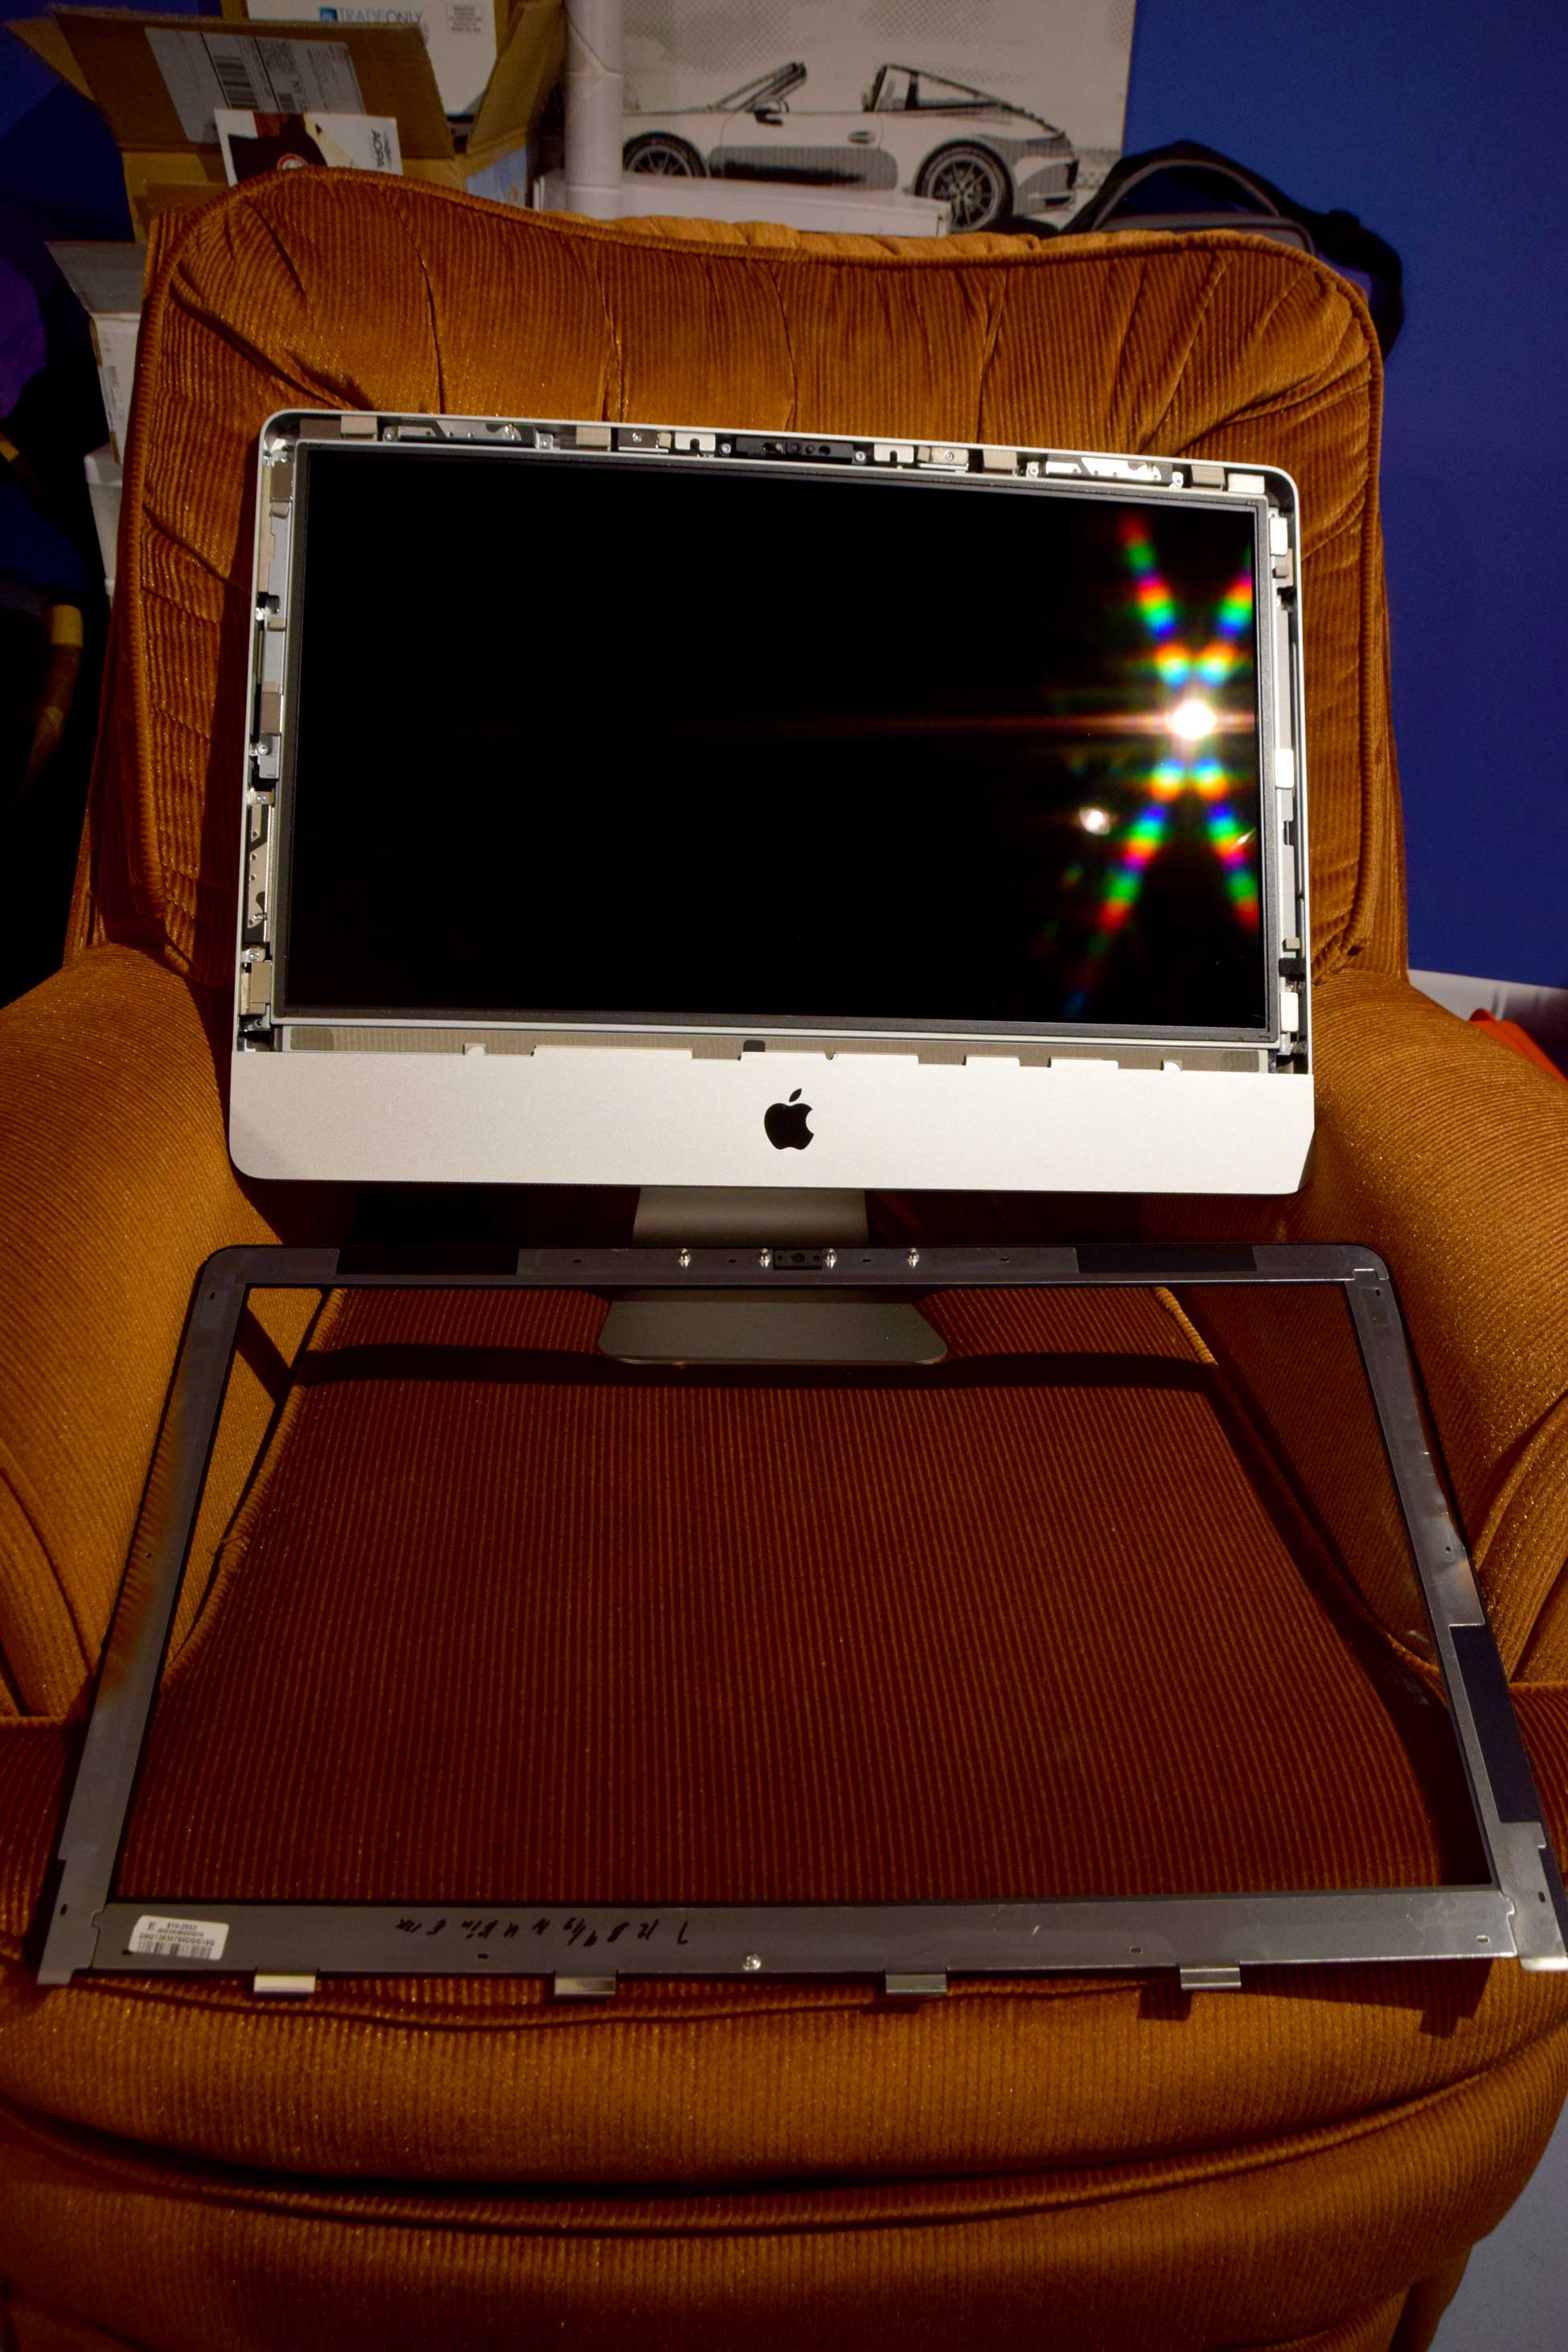 Photo showing iMac partially reassembled and waiting for glass to be installed over the screen.